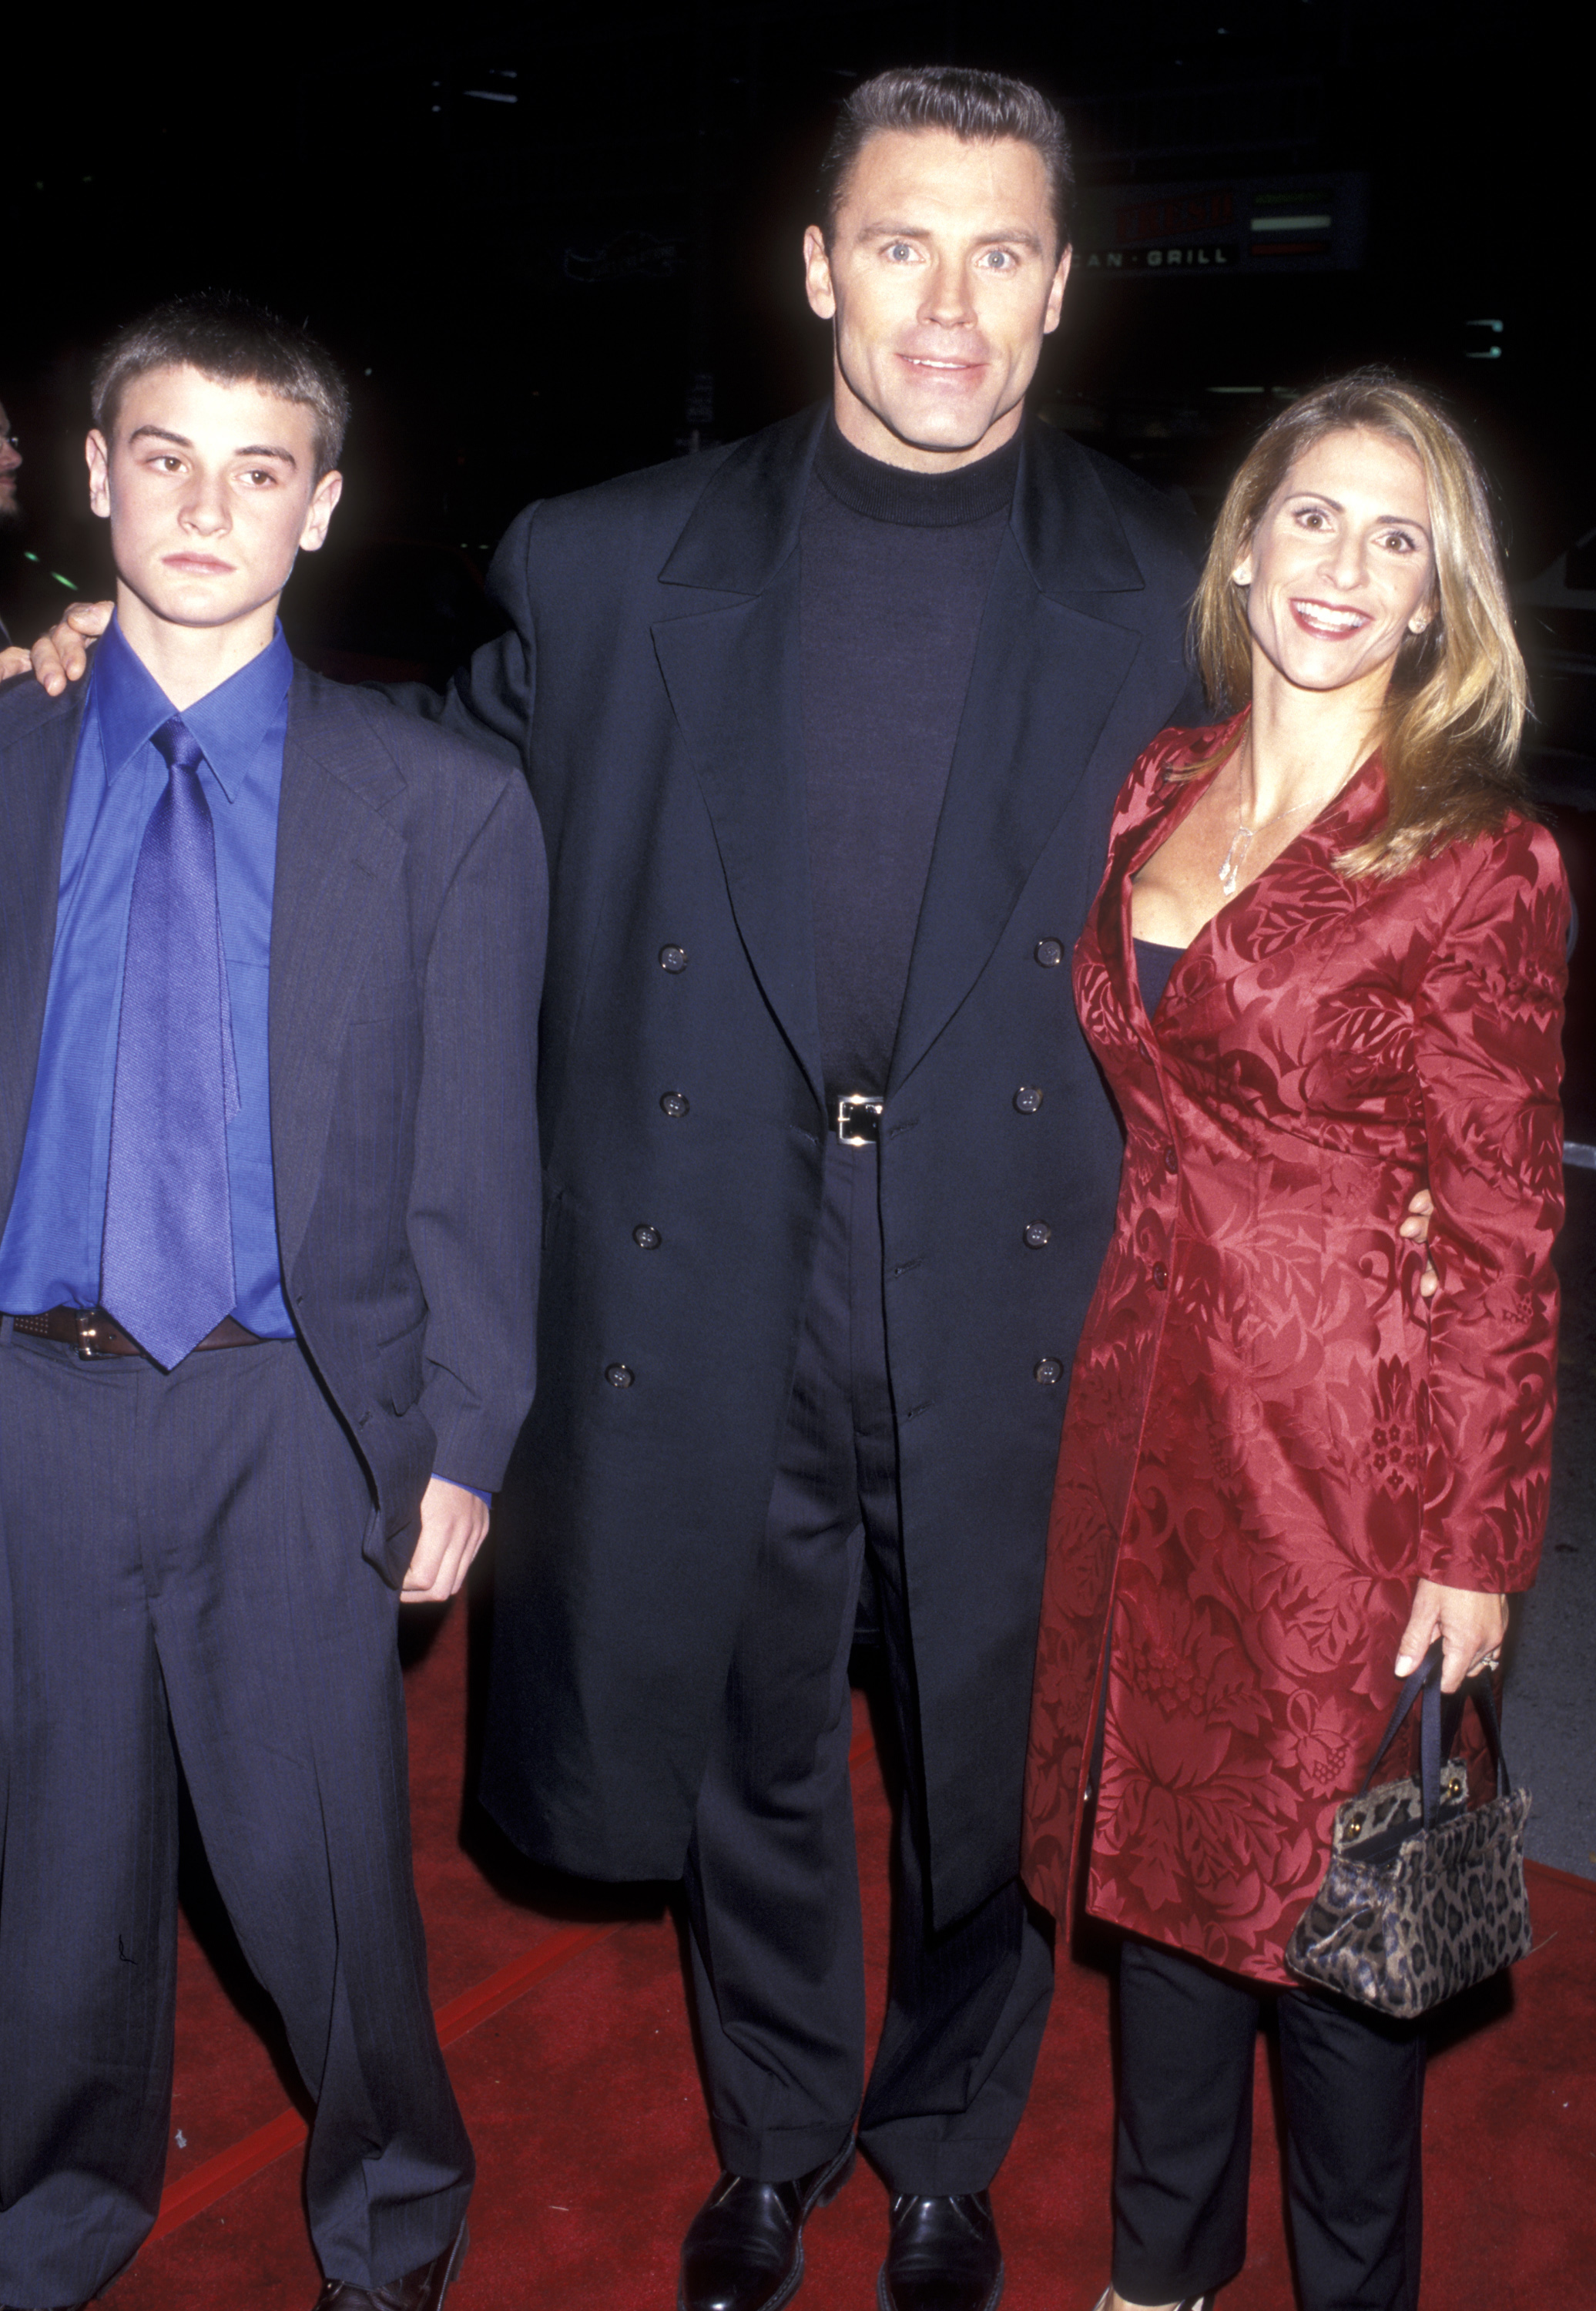 Howie Long, his wife Diane Addonizio, and their son Christopher Long at the "Firestorm" premiere on January 7, 1998, in Westwood, California | Source: Getty Images